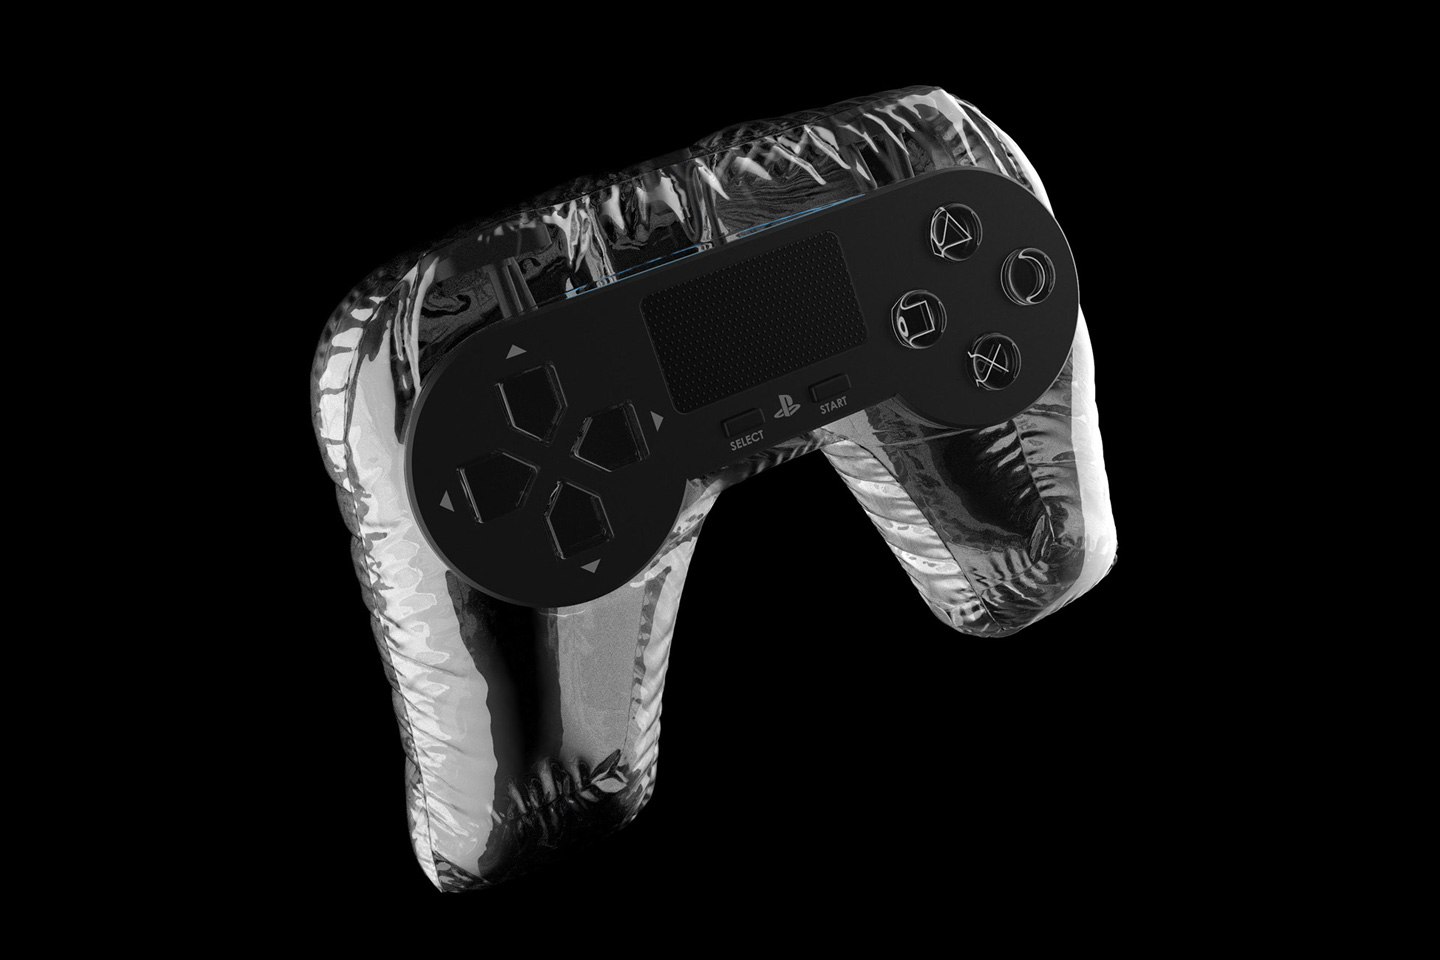 protector your gaming controllers with this inflatable device